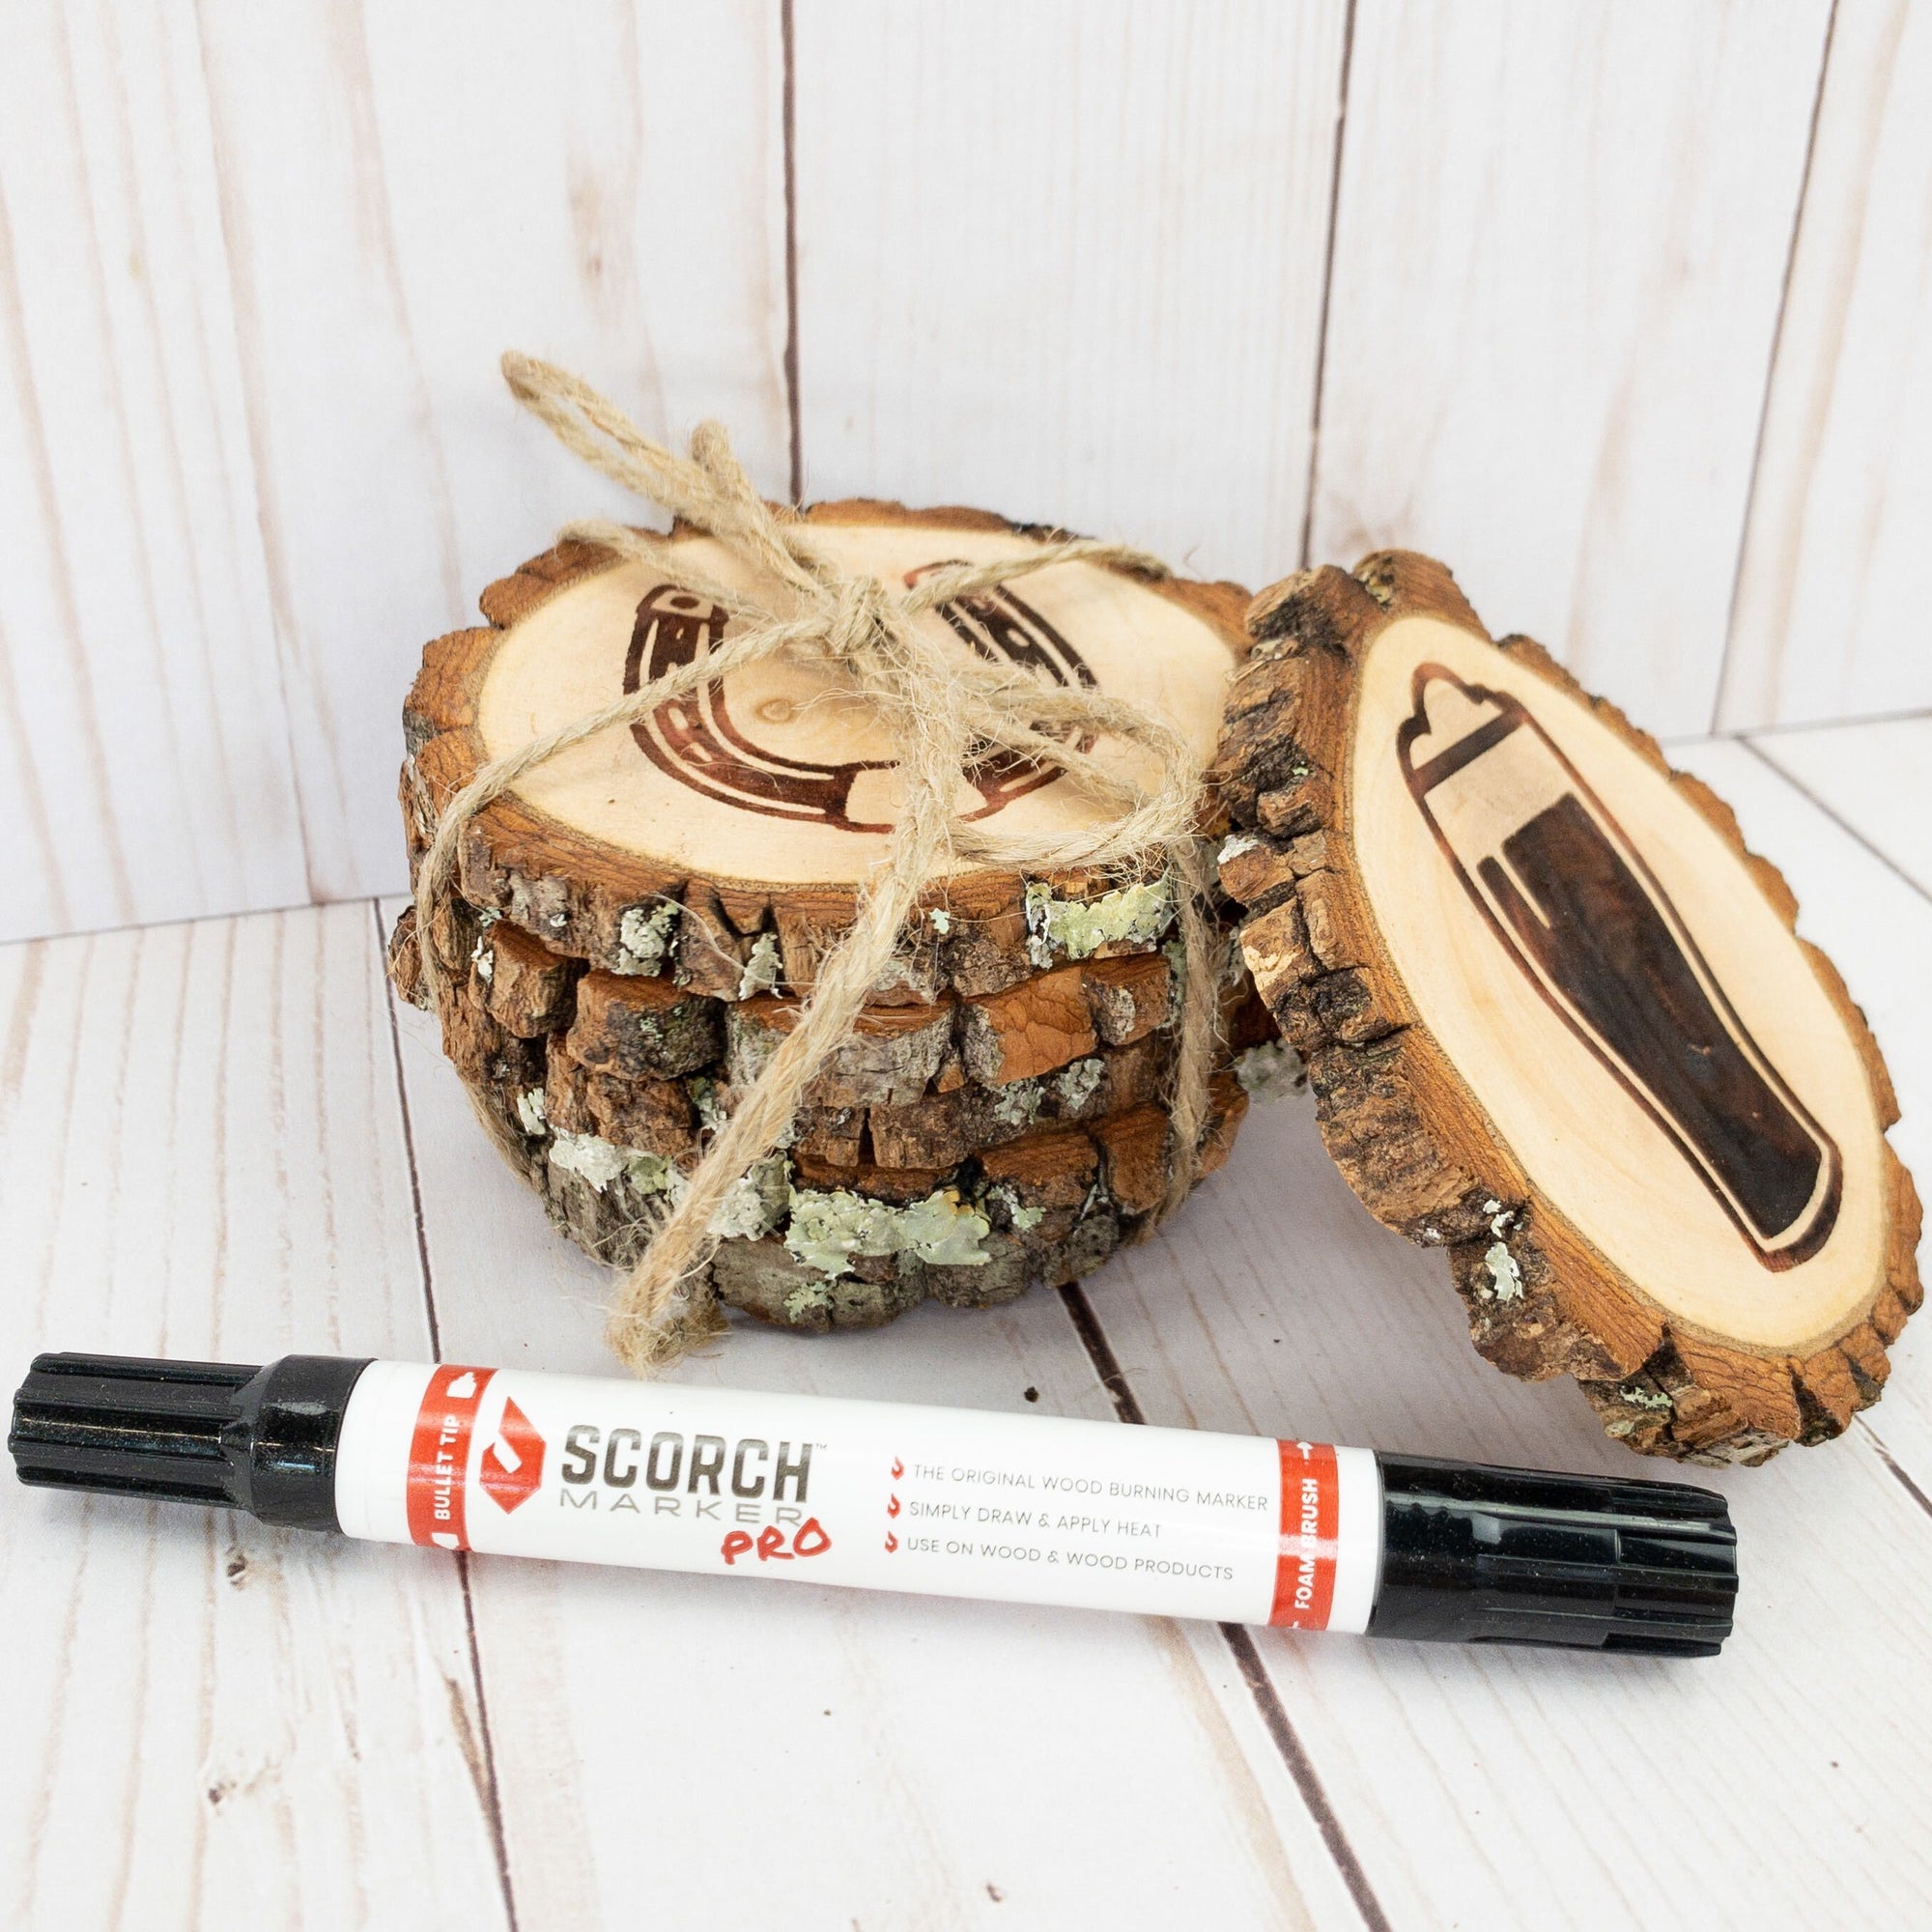 How to Waterproof Your Woodburned Crafts - Scorch Marker